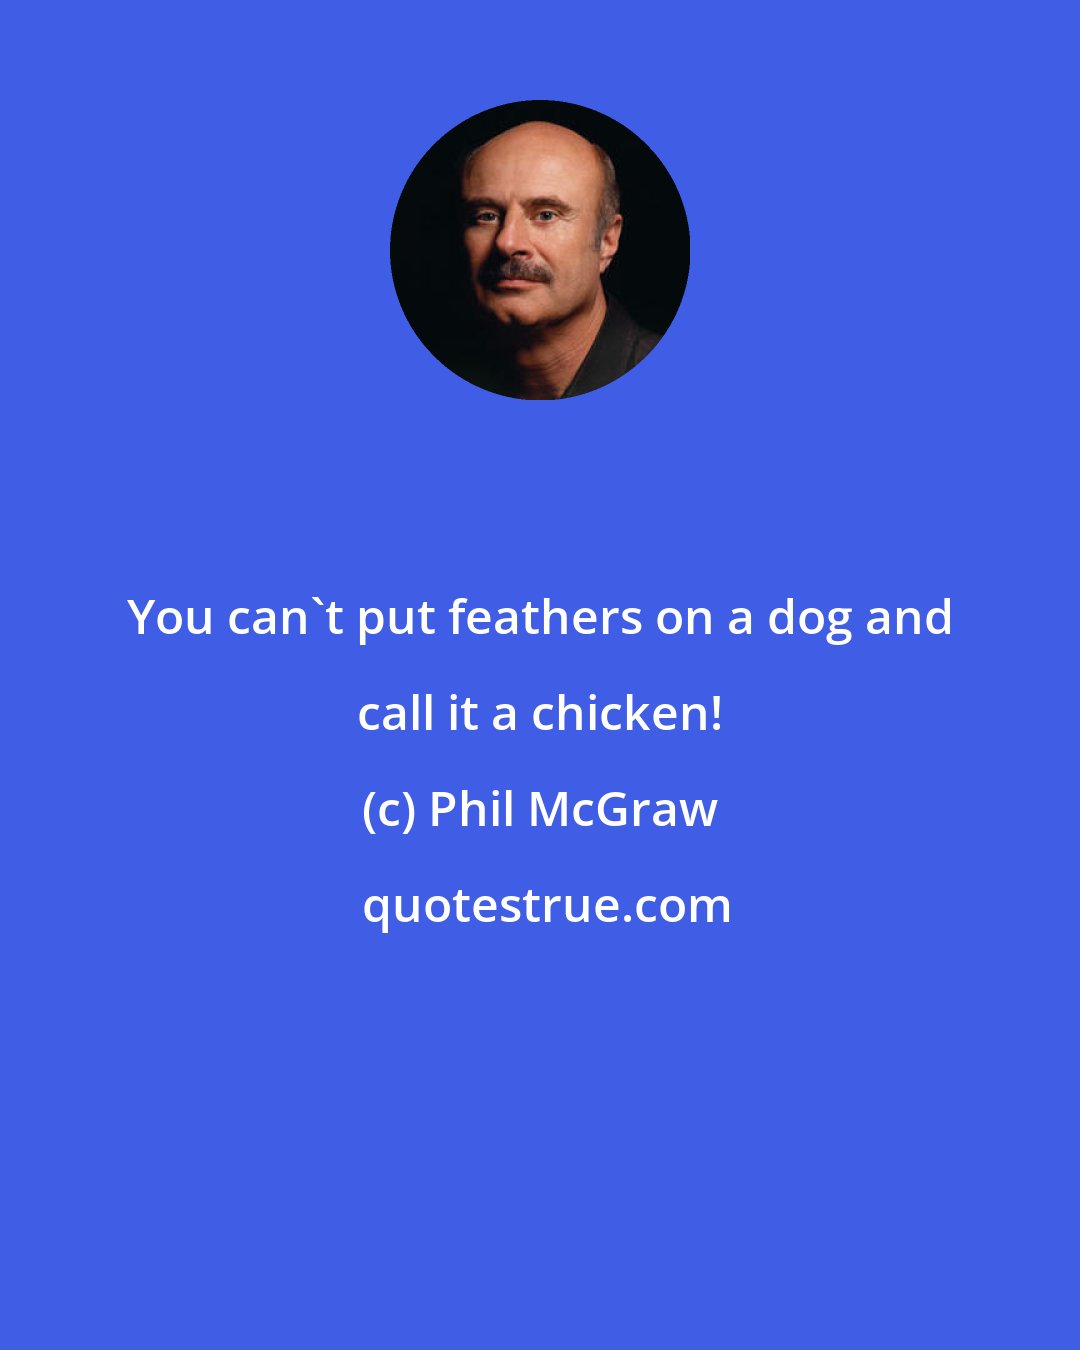 Phil McGraw: You can't put feathers on a dog and call it a chicken!